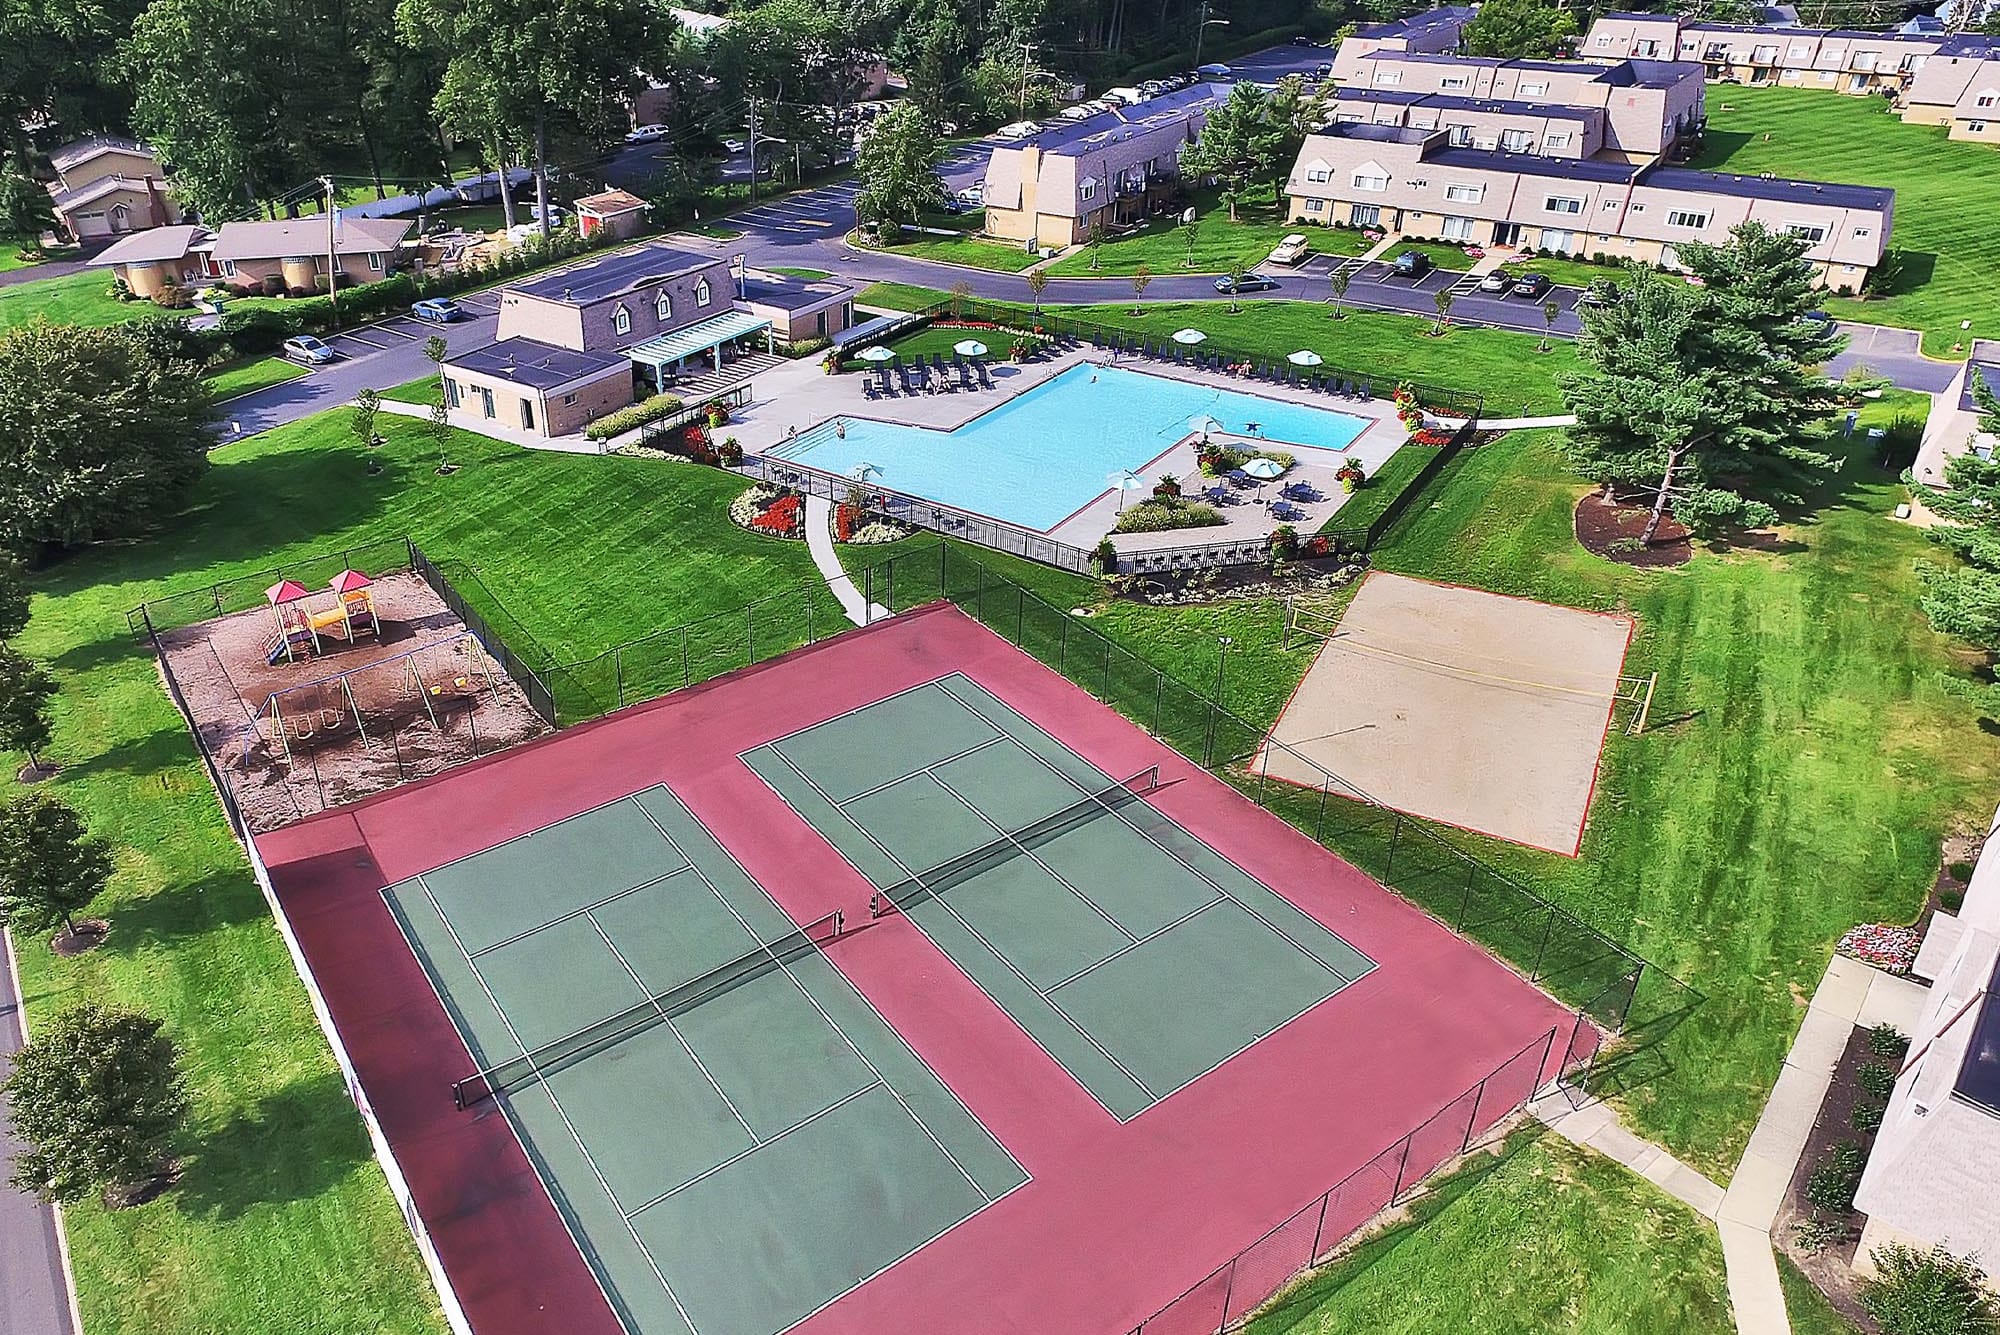 Aerial view of tennis courts, volleyball and pool at The Commons, Bensalem, Pennsylvania